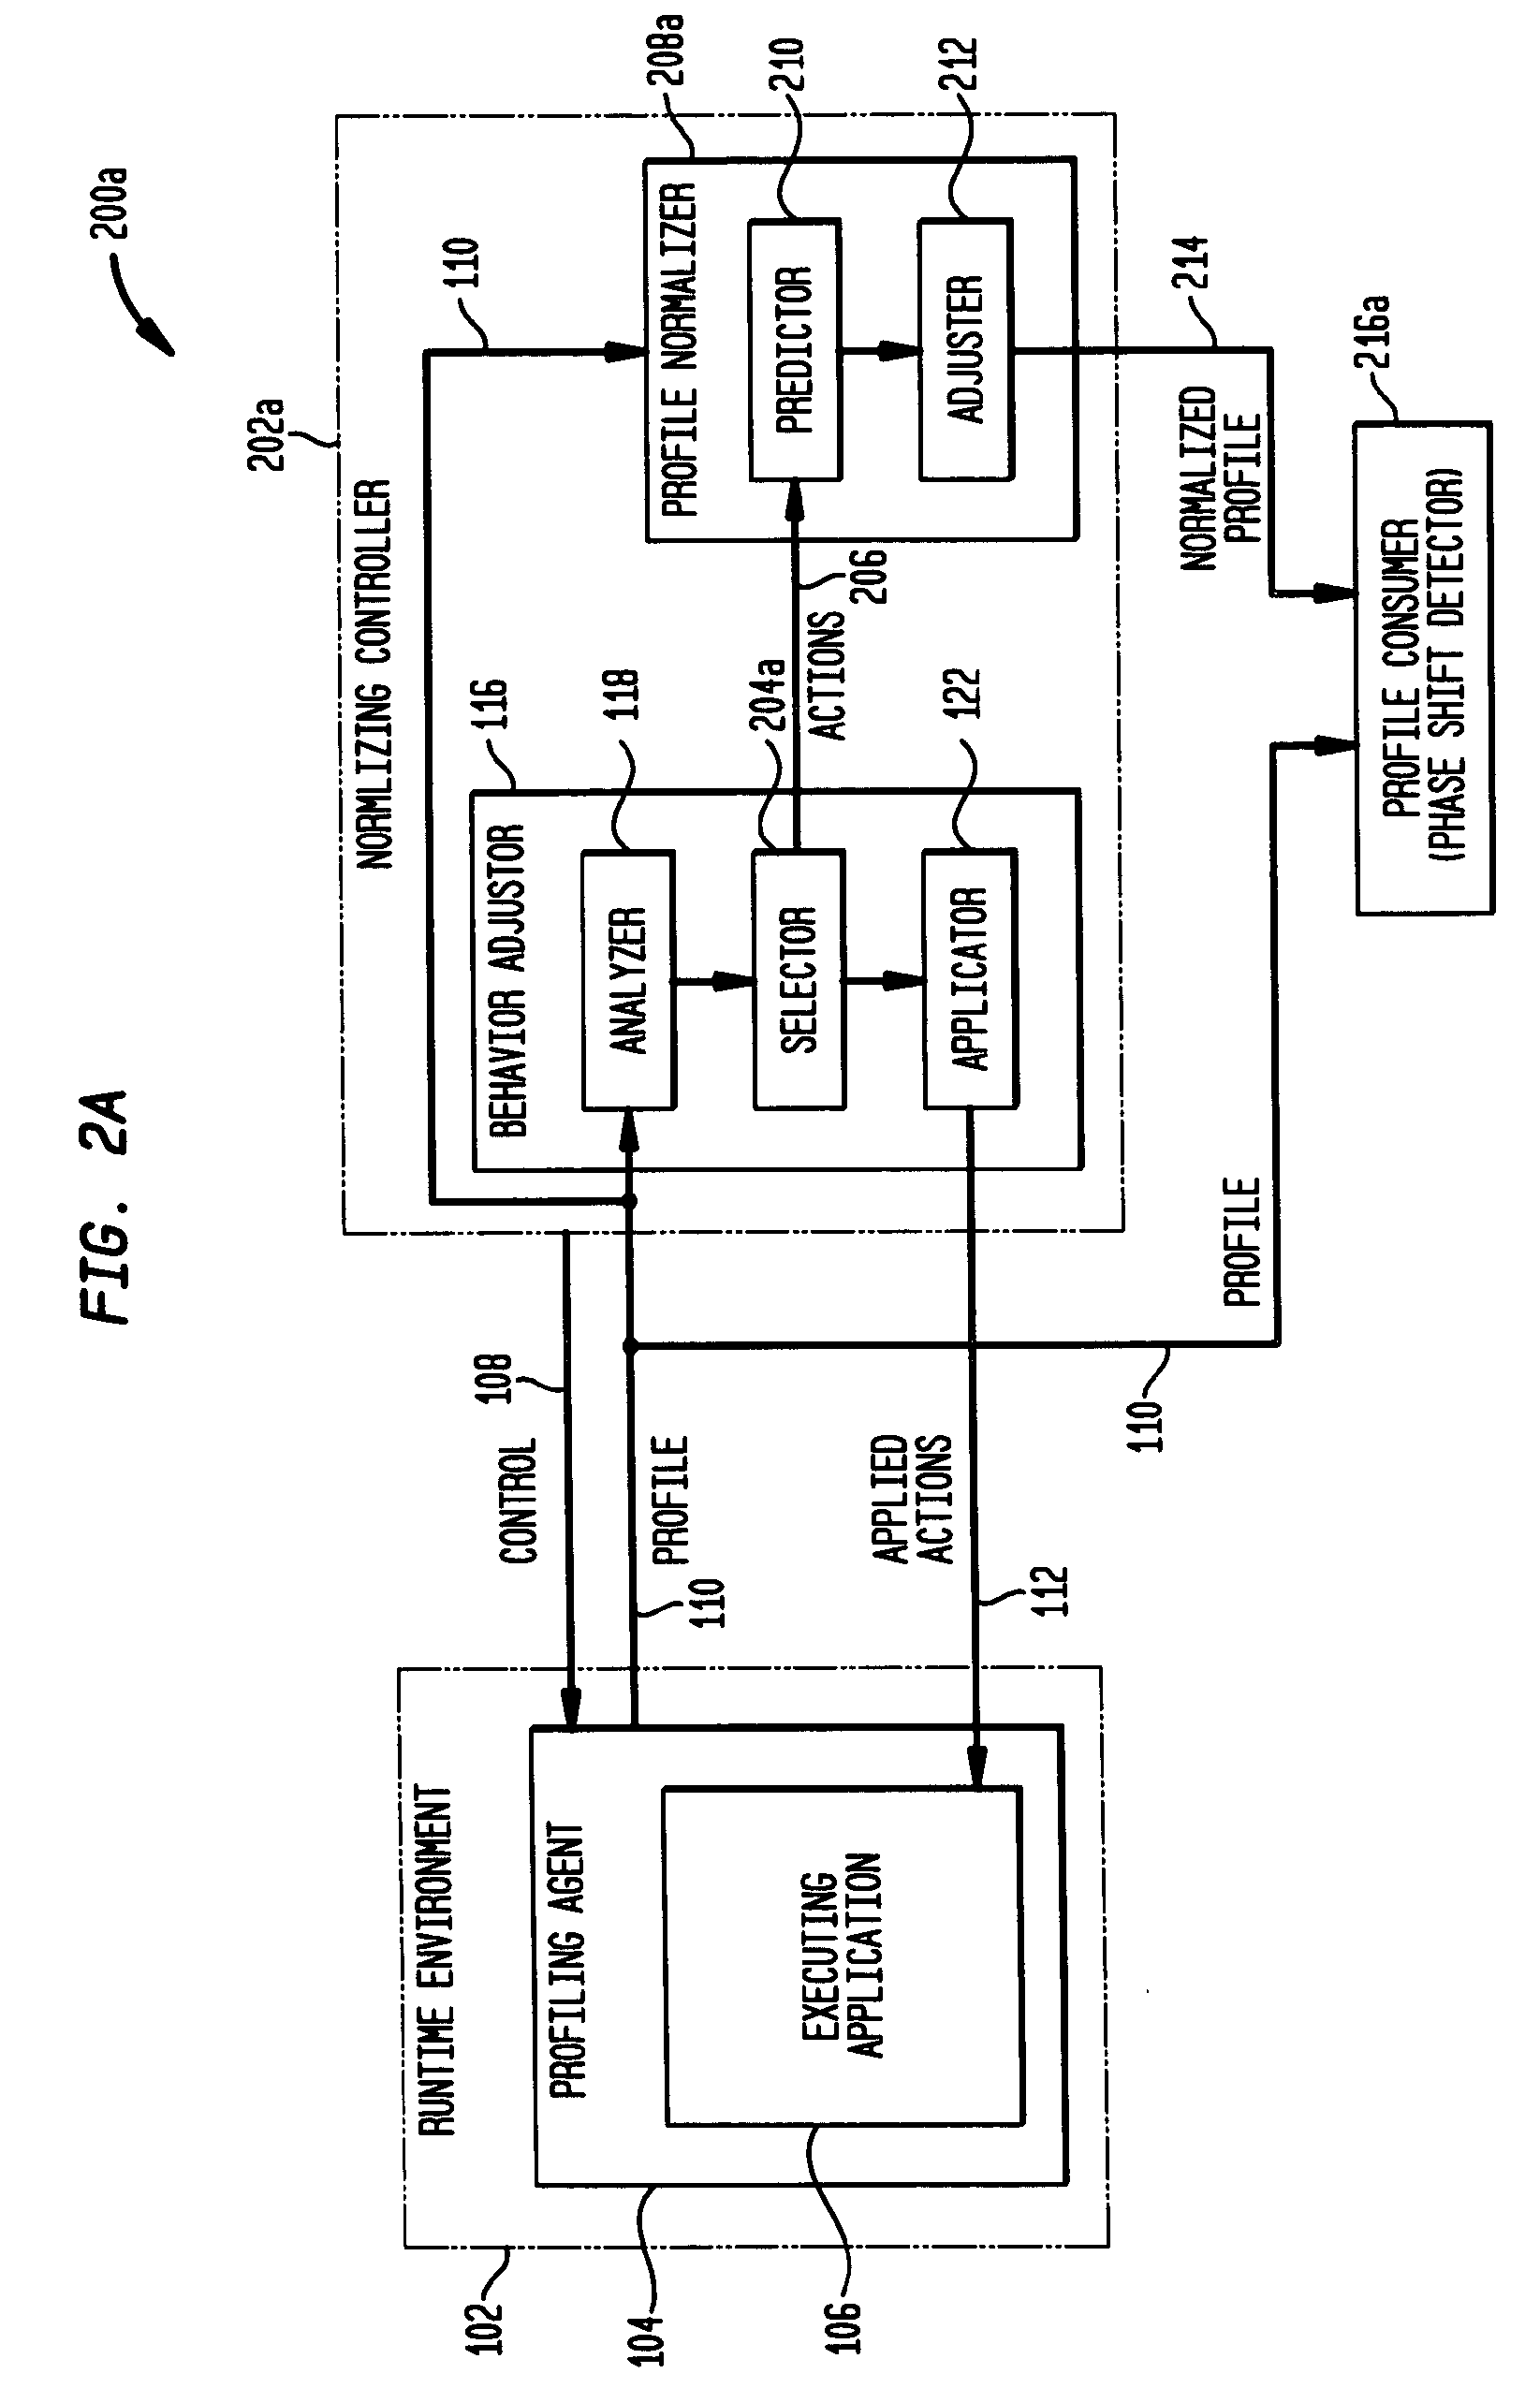 Profile normalization in an autonomic software system